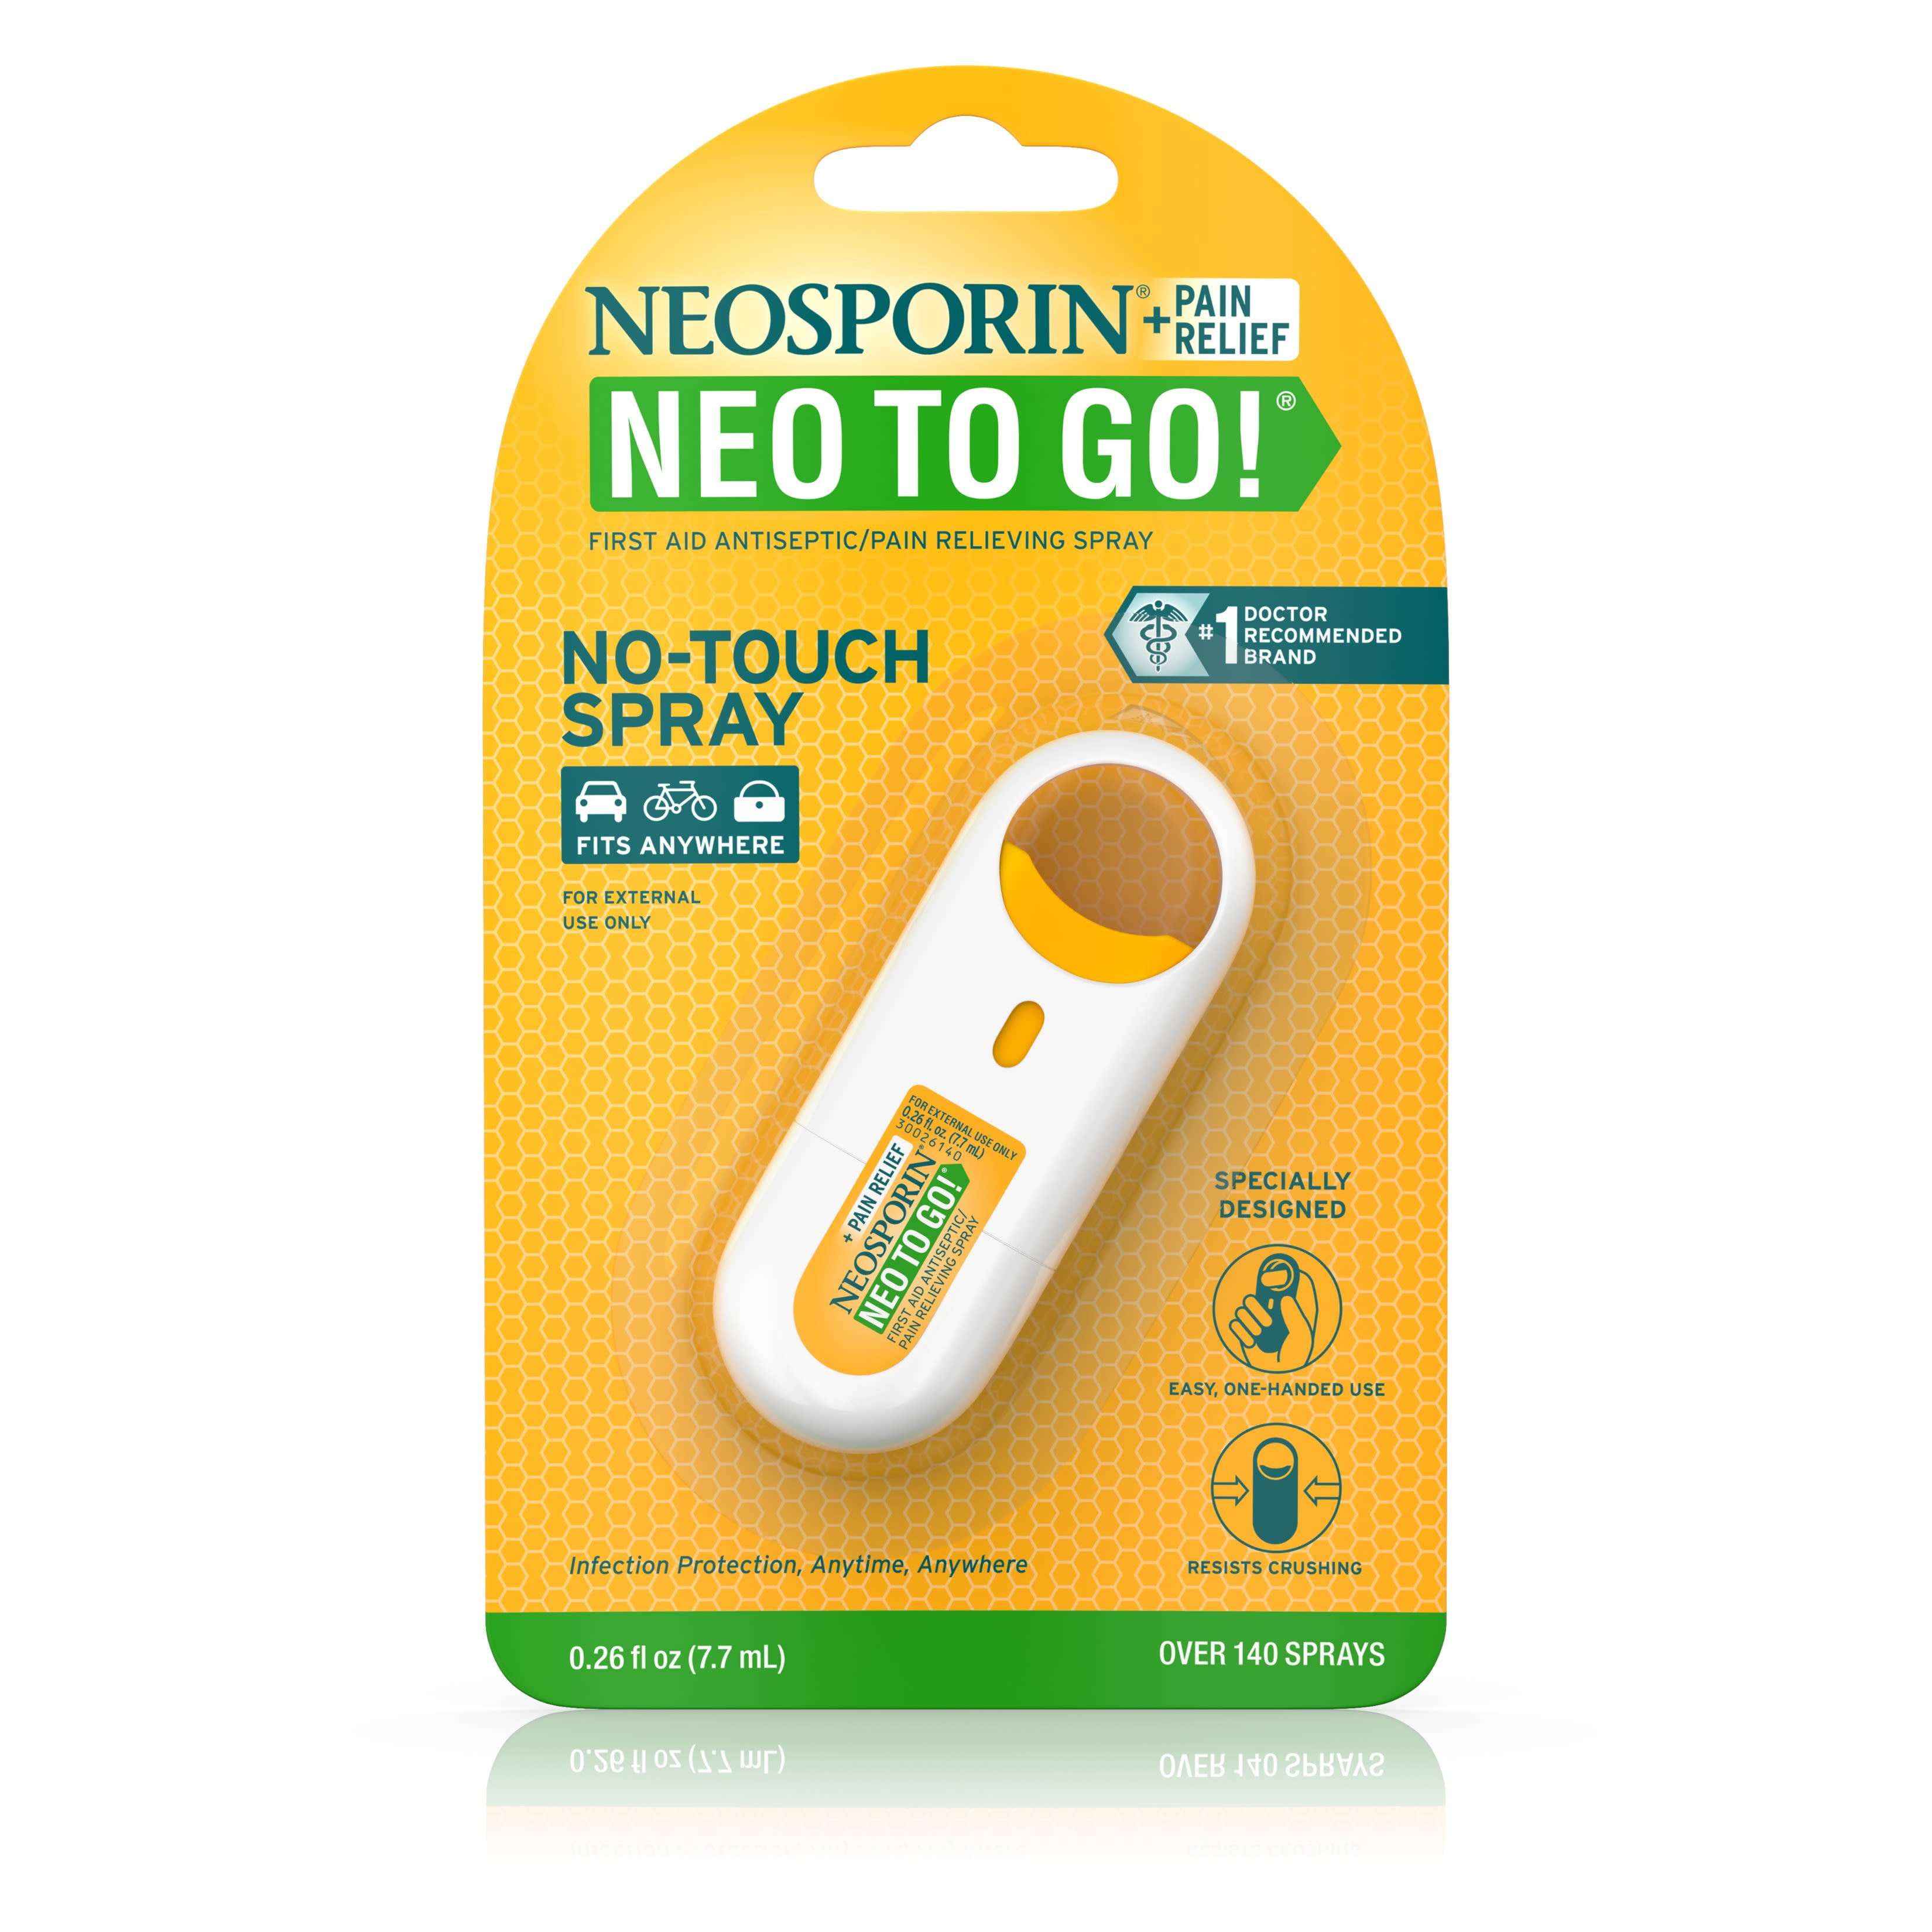 neosporin-pain-relief-neo-to-go-first-aid-antiseptic-pain-relieving-oz